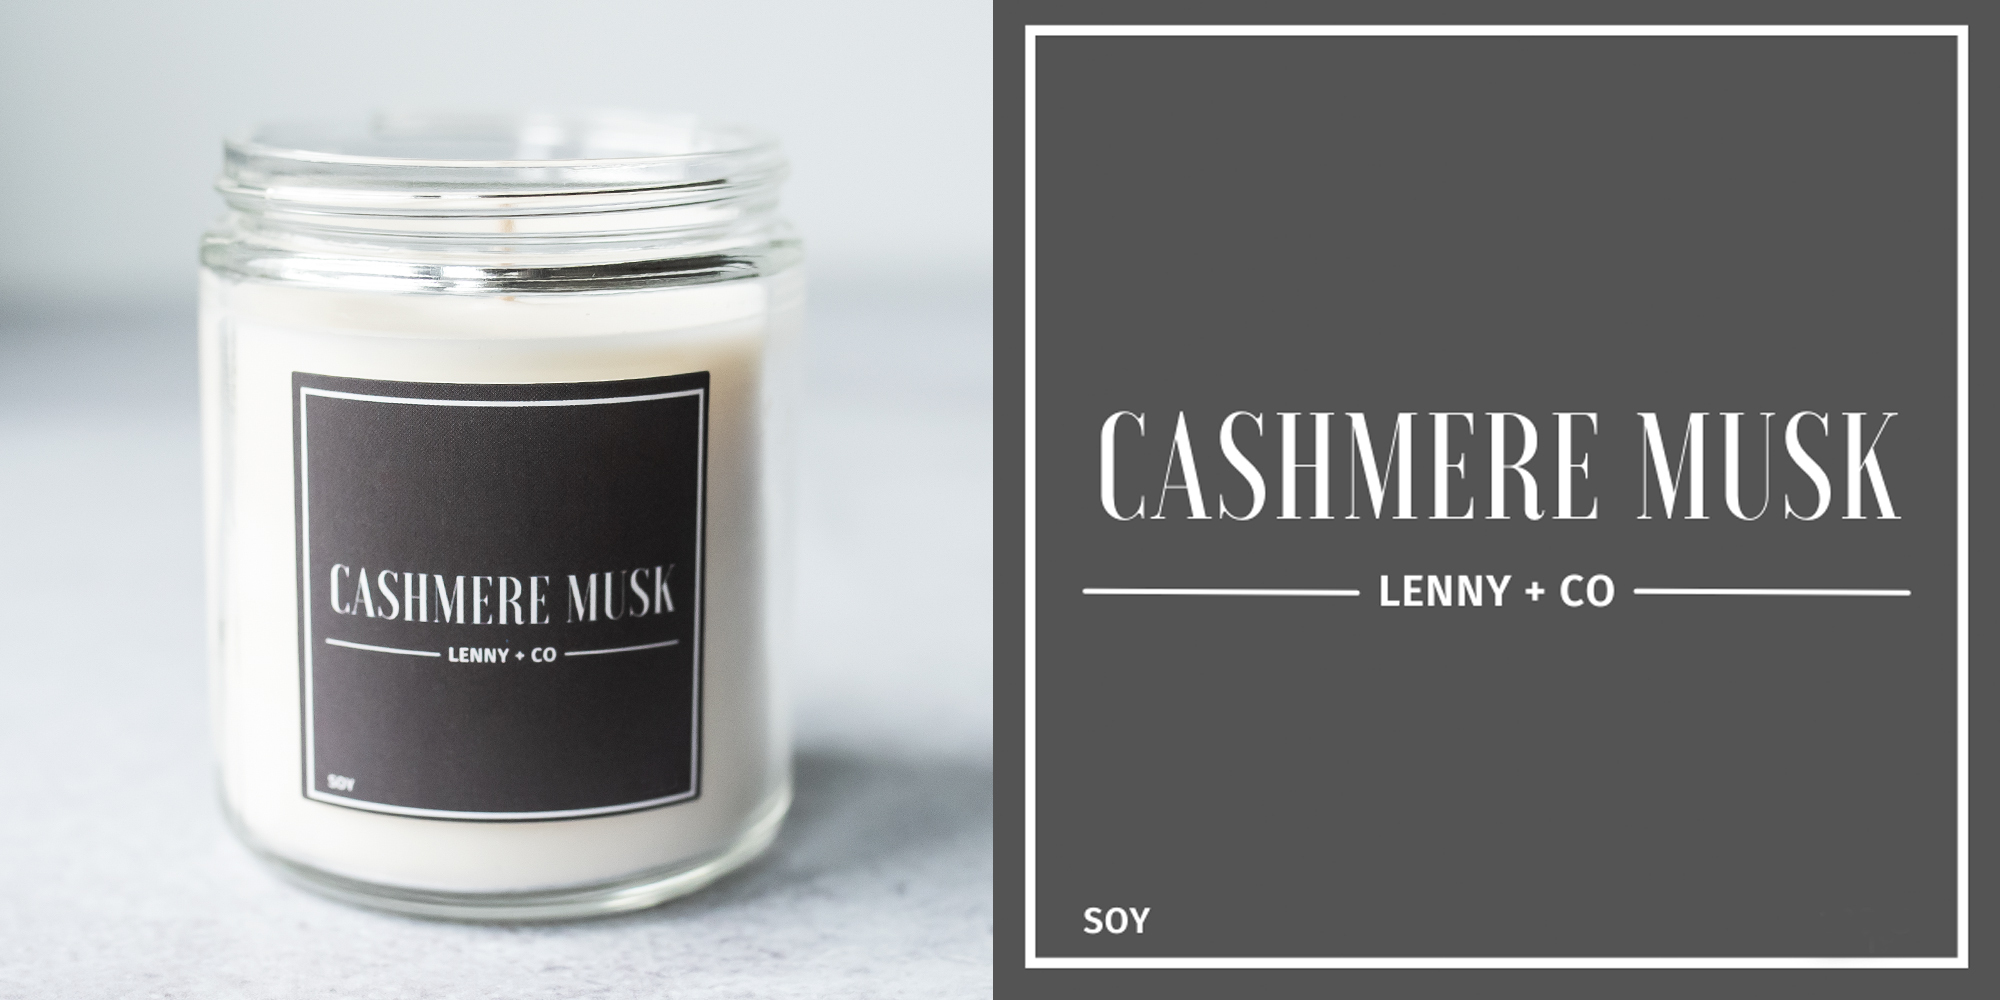 Cashmere Musk fragrance oil candle and label.